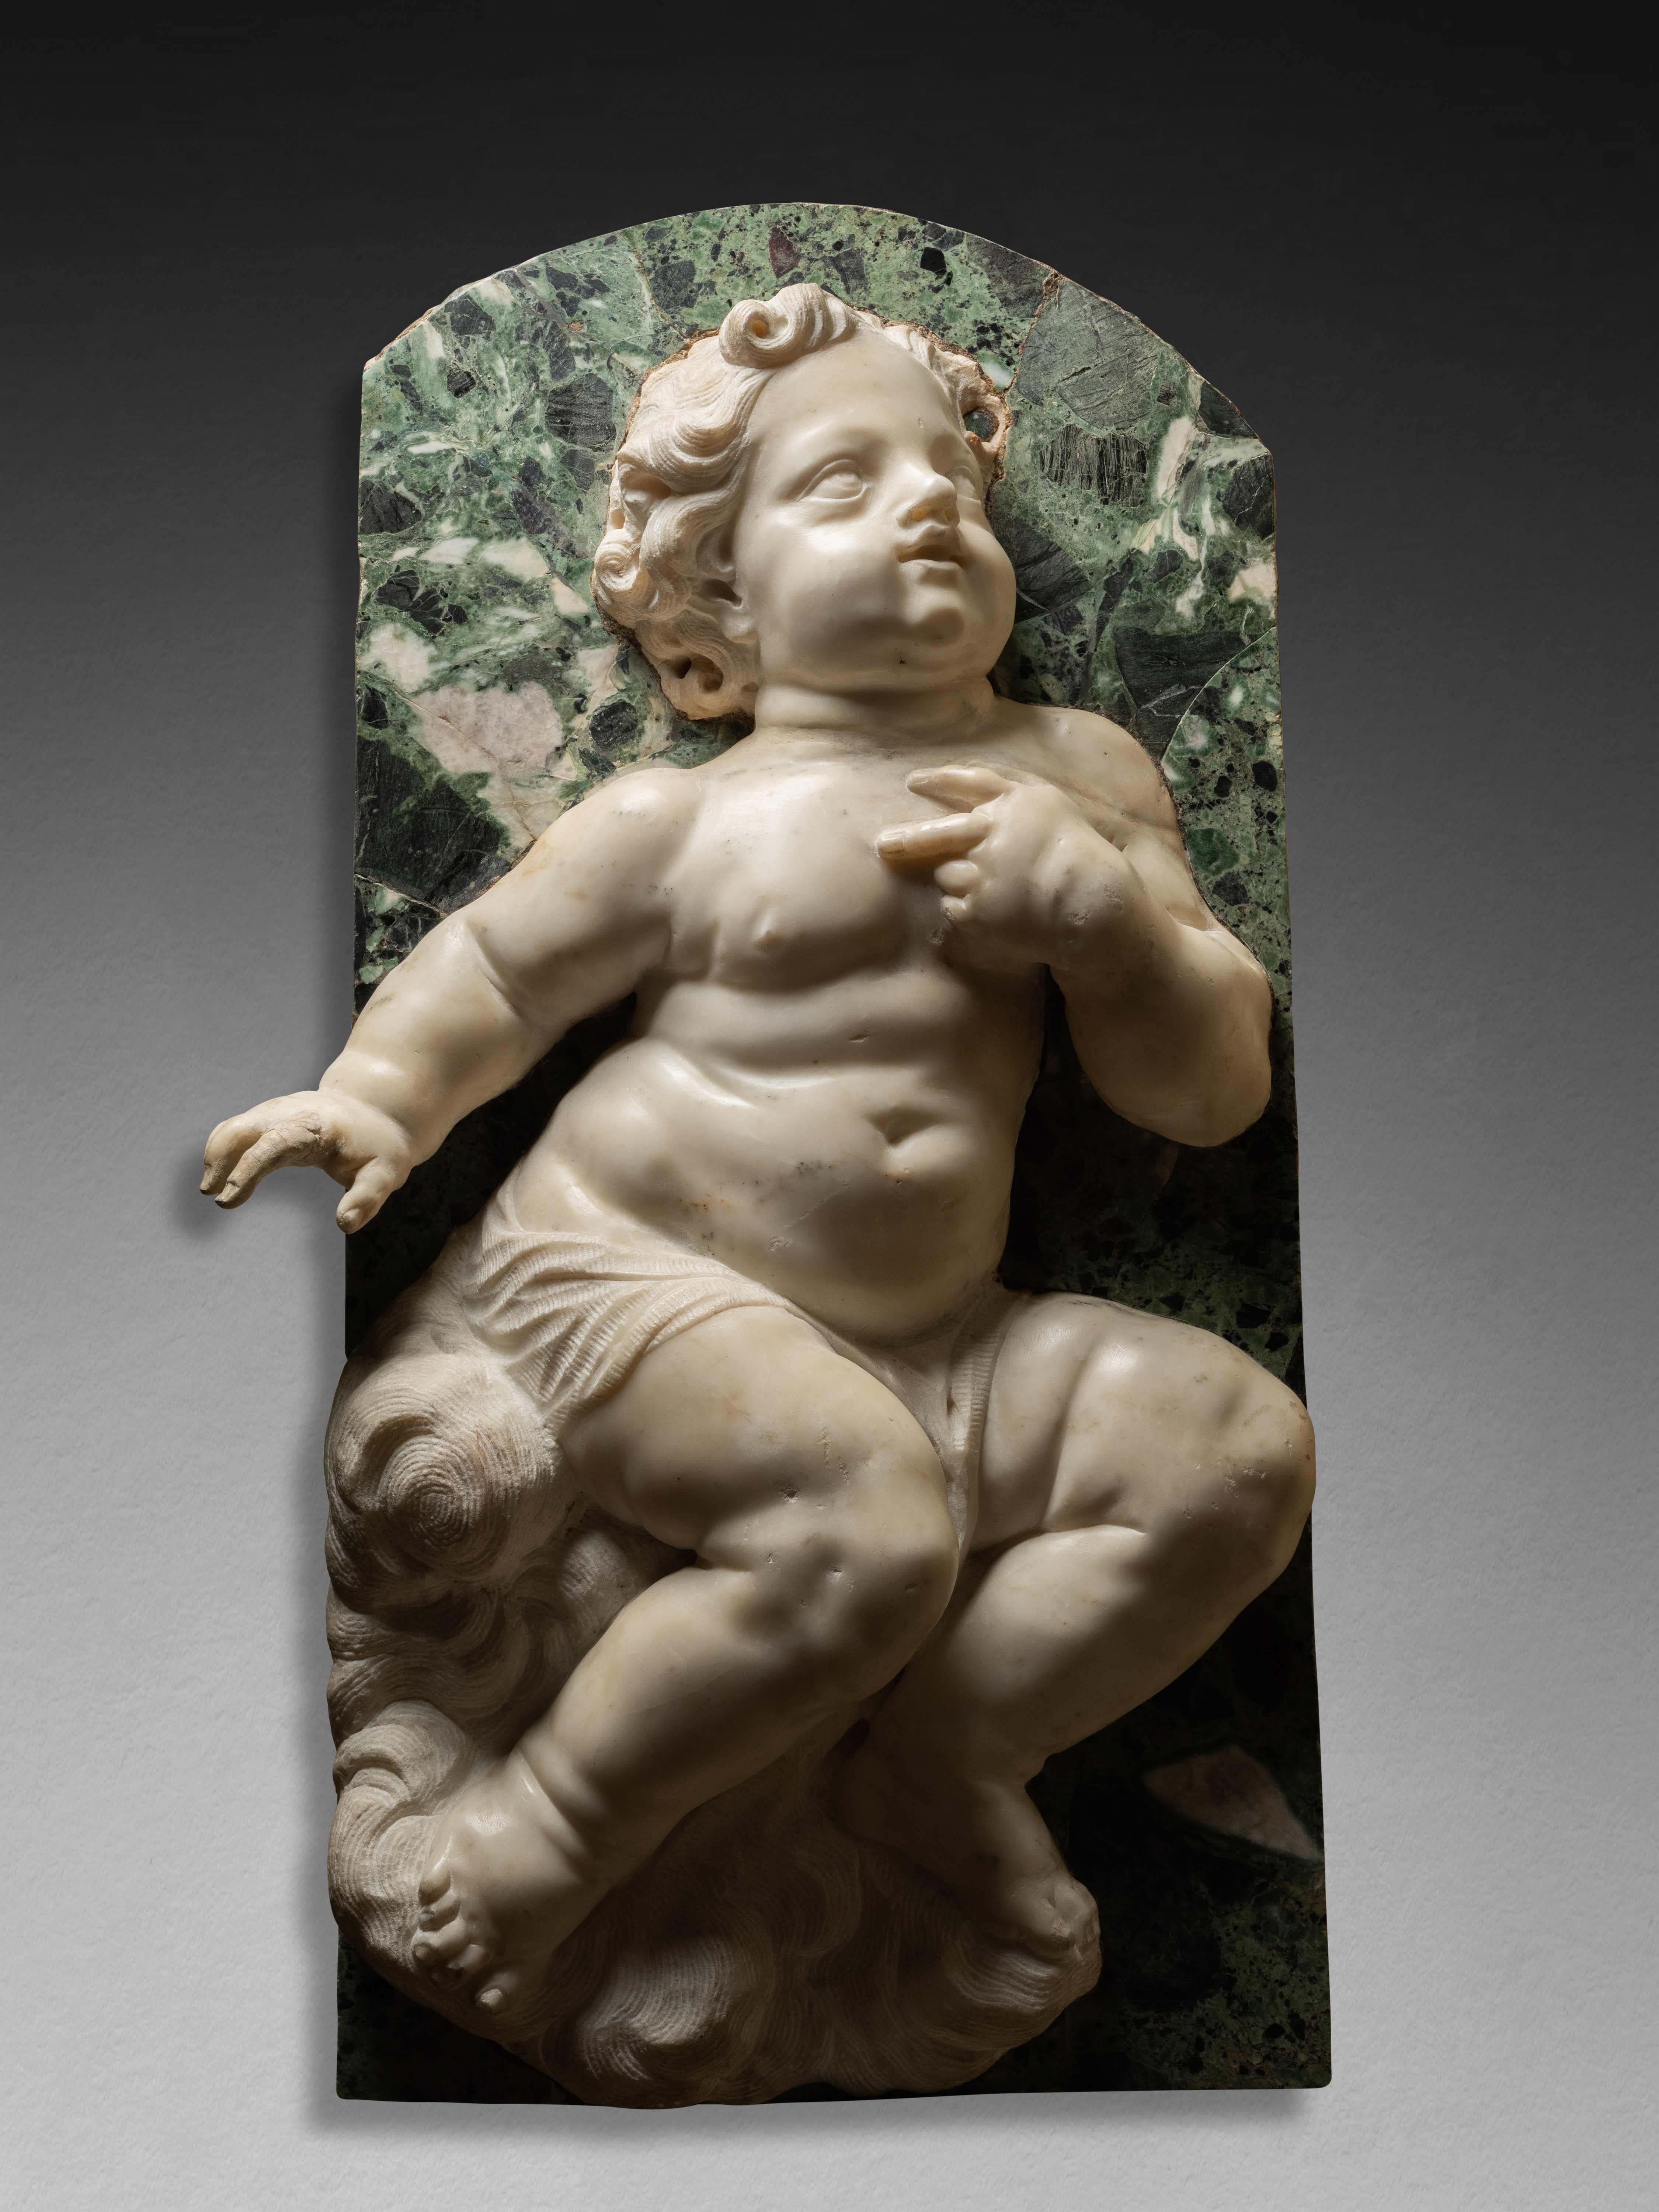 Carlo Marcellini (Florence 1644 – 1713)
Putto
White and green marble 
41.5 x 73.5 cm

This marble putto carved in high relief, almost a tutto tondo, and set on an elegant green marble background, appears almost naked, sitting on a cloud. His